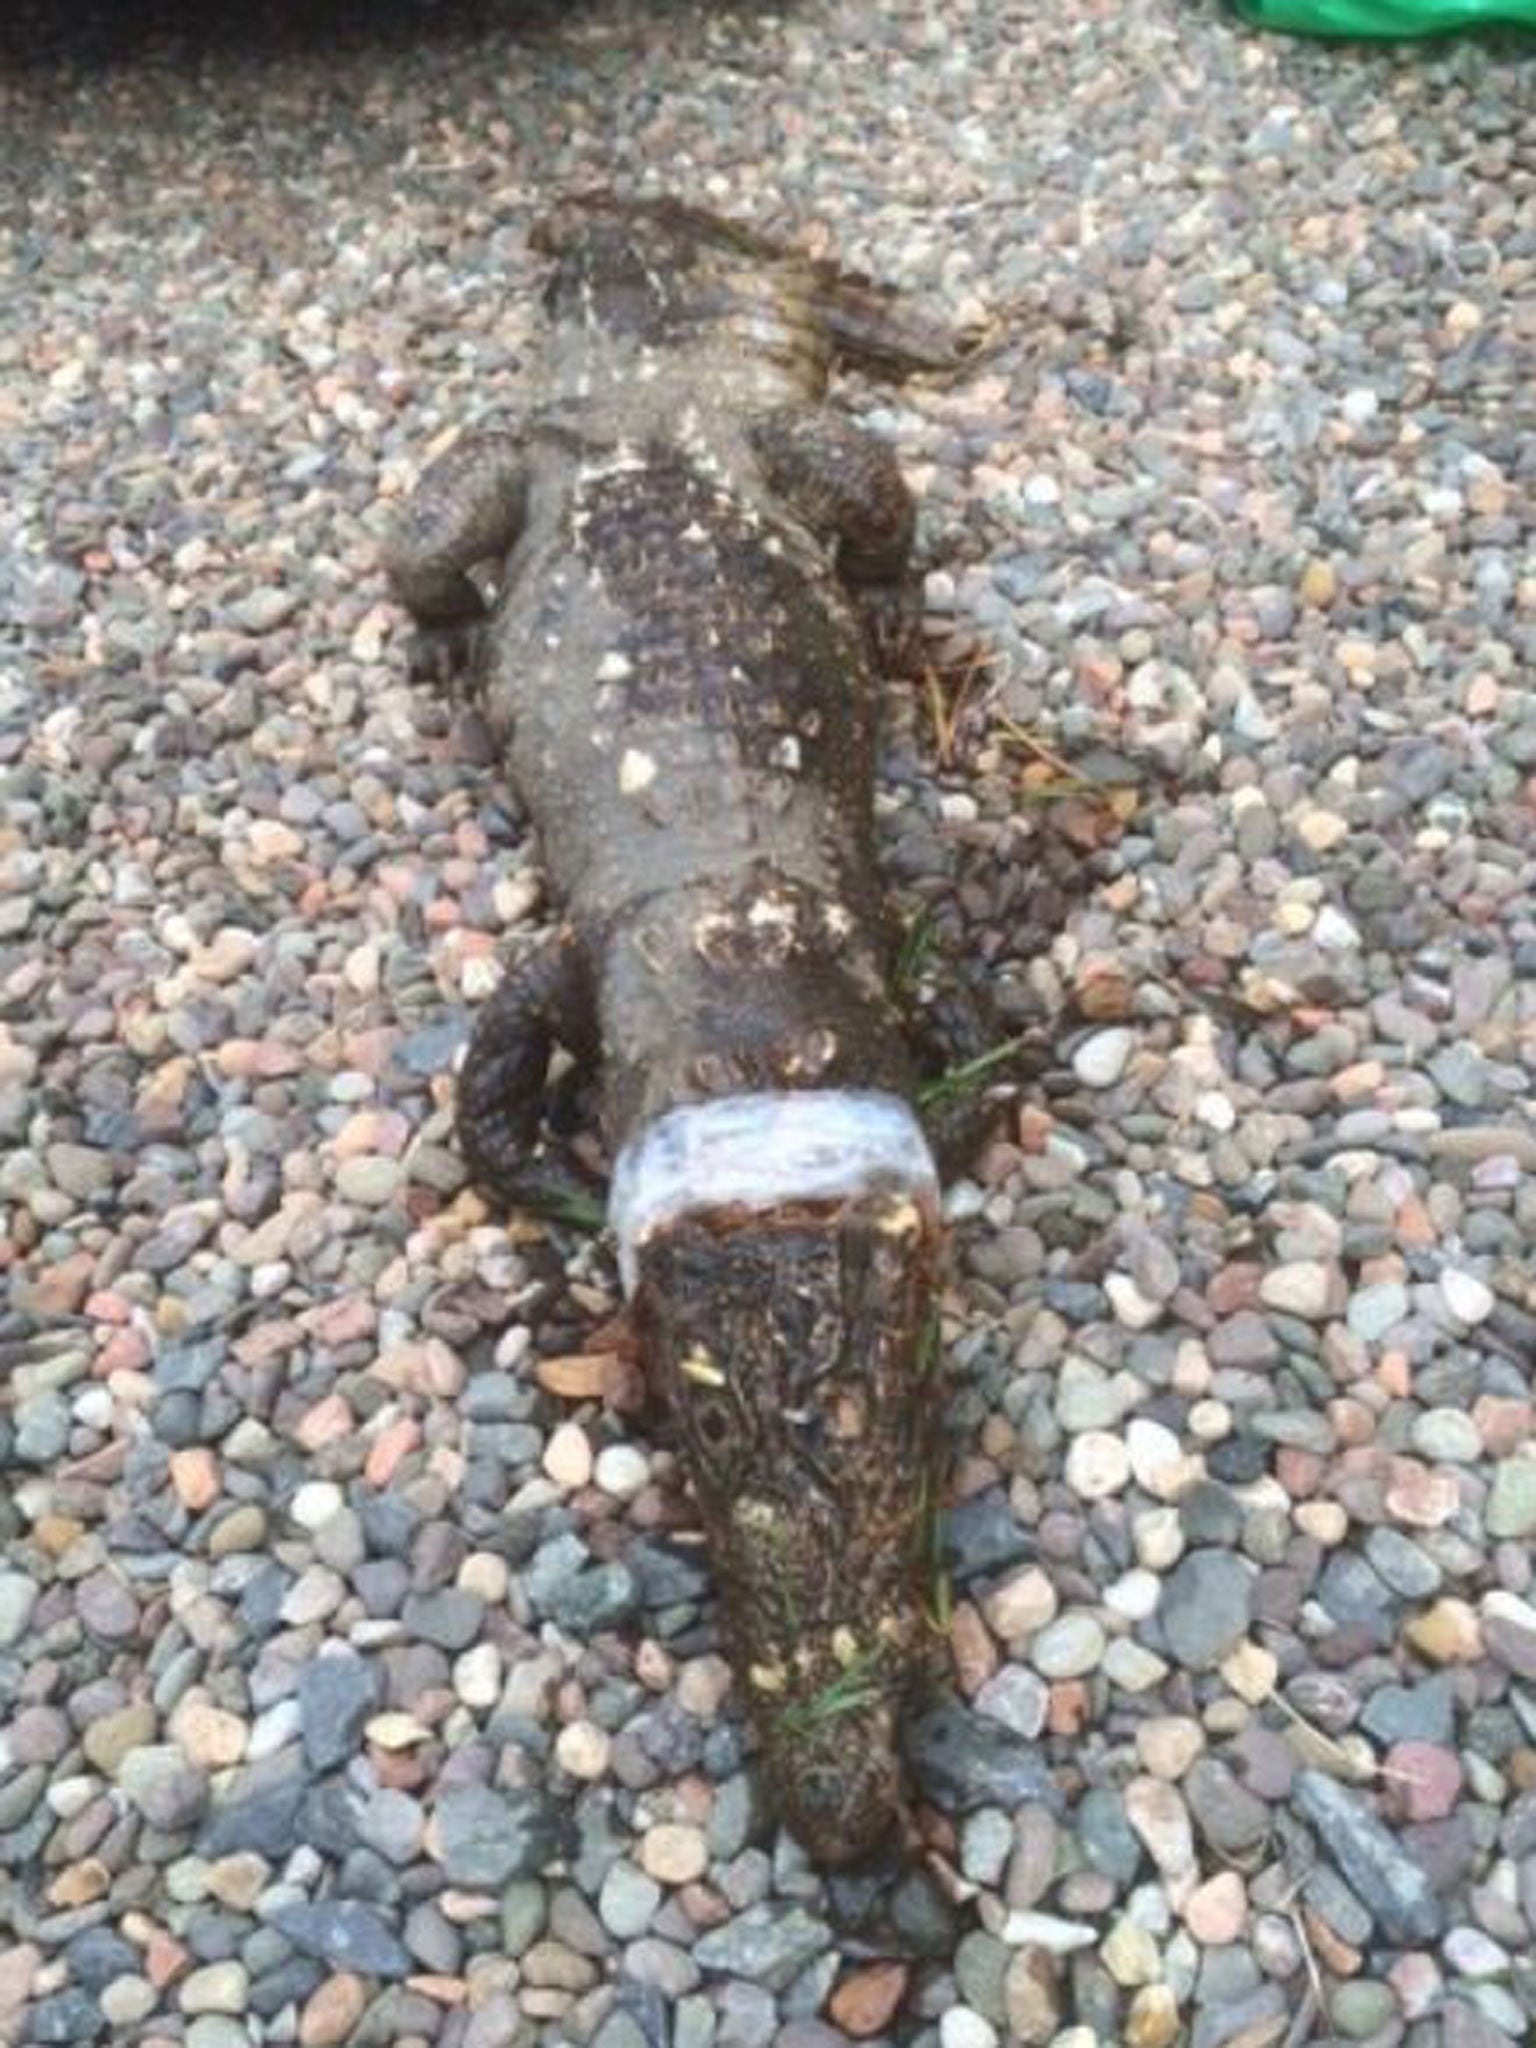 Undated handout photo issued by Scottish SPCA of a stuffed West African dwarf crocodile that was discovered in a stream at Carnwath Golf Course, near Biggar in South Lanarkshire,